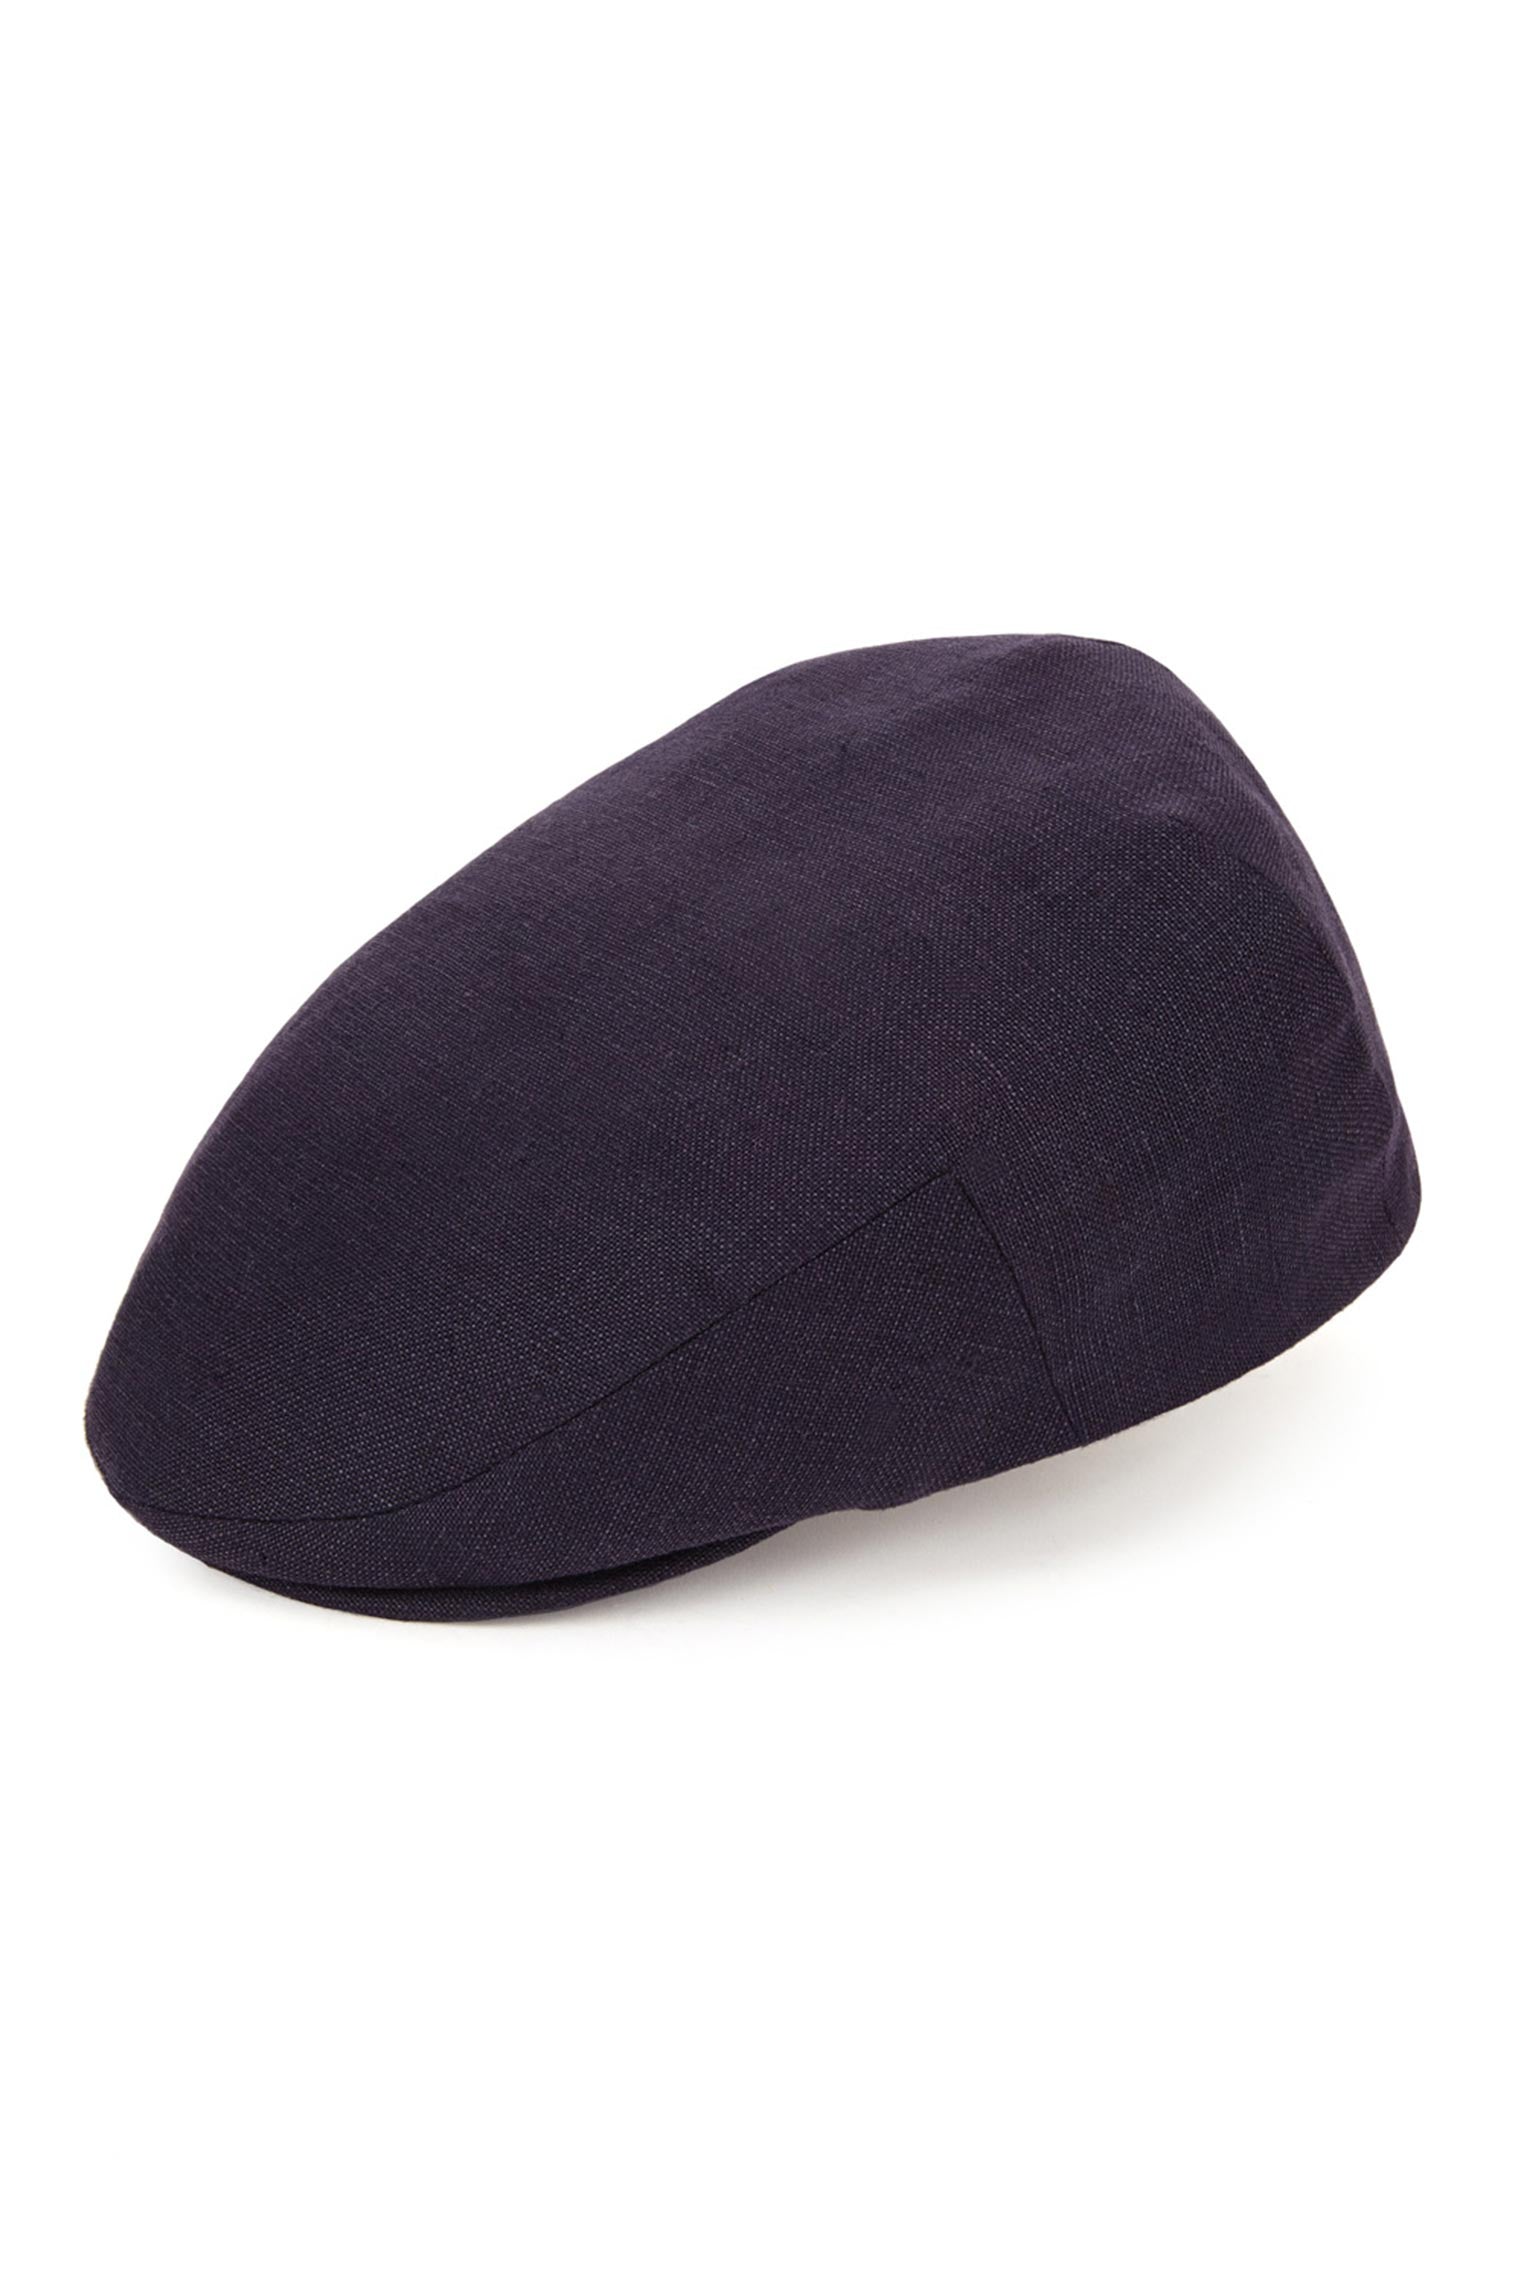 Florida Linen Flat Cap - Hats for Tall People - Lock & Co. Hatters London UK